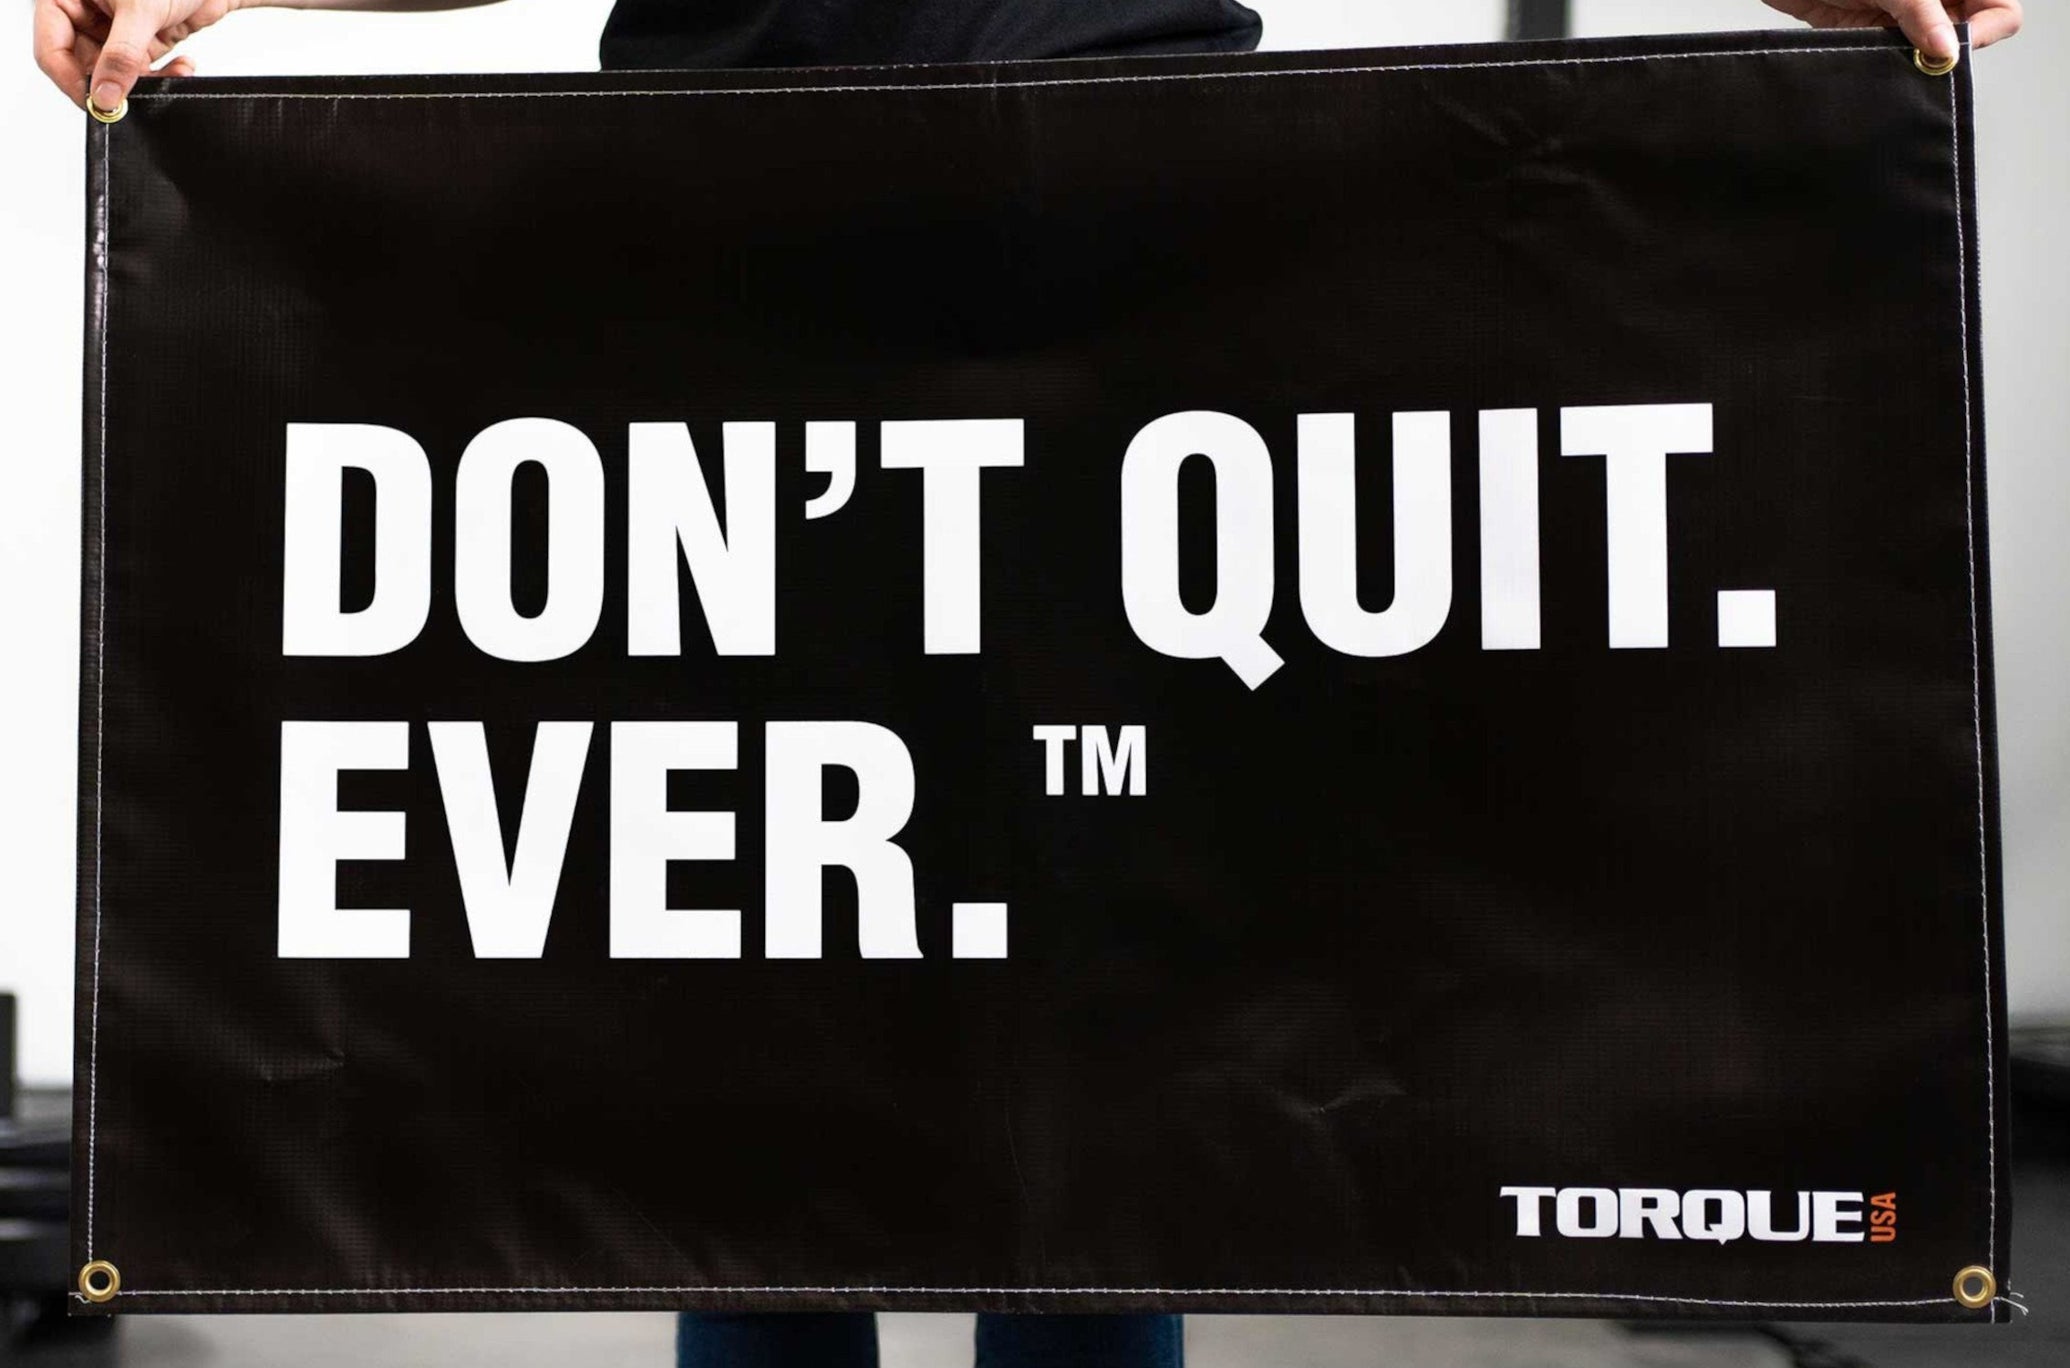 Torque "Don't Quit. Ever." Gym Banner